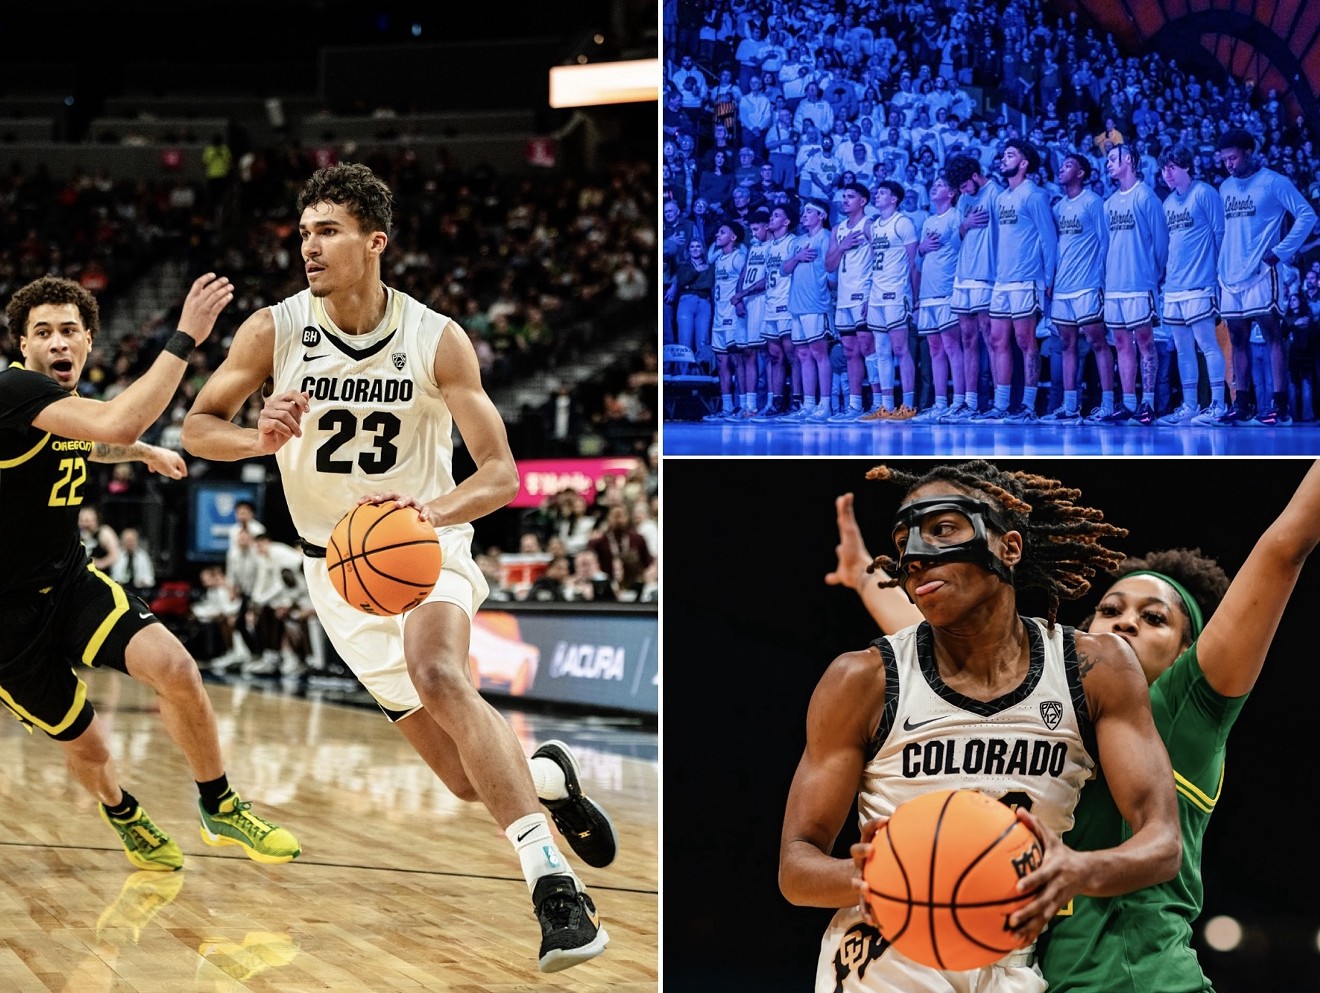 Colorado has three different teams in the Big Dance this year for men's and women's basketball.